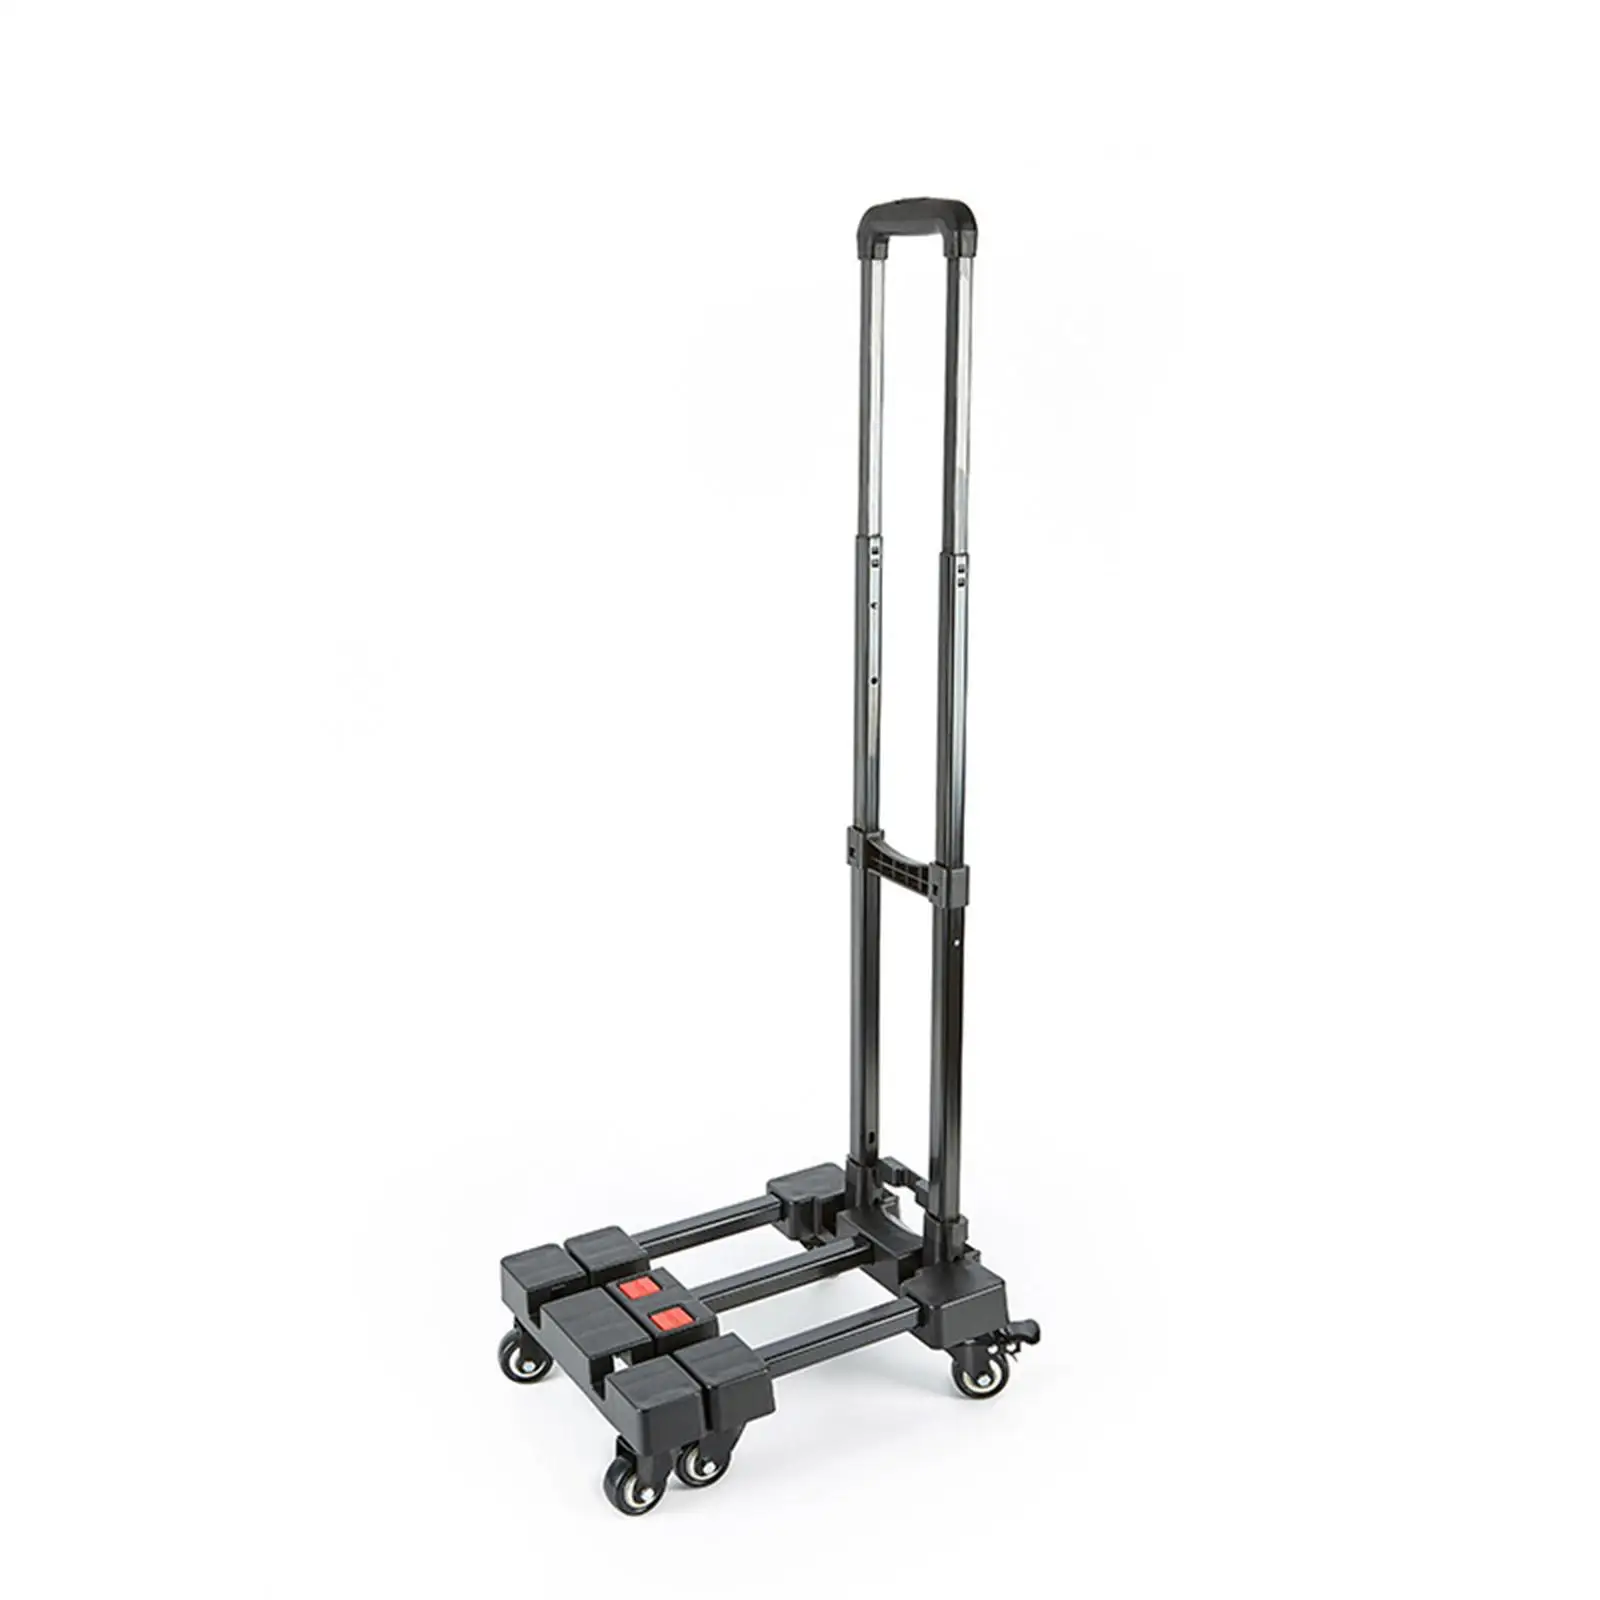 Folding Hand Truck Extendable Base Shopping Cart for Easy Moving Delivery Houshold Transportation Maximum Load 100kg (220lb)